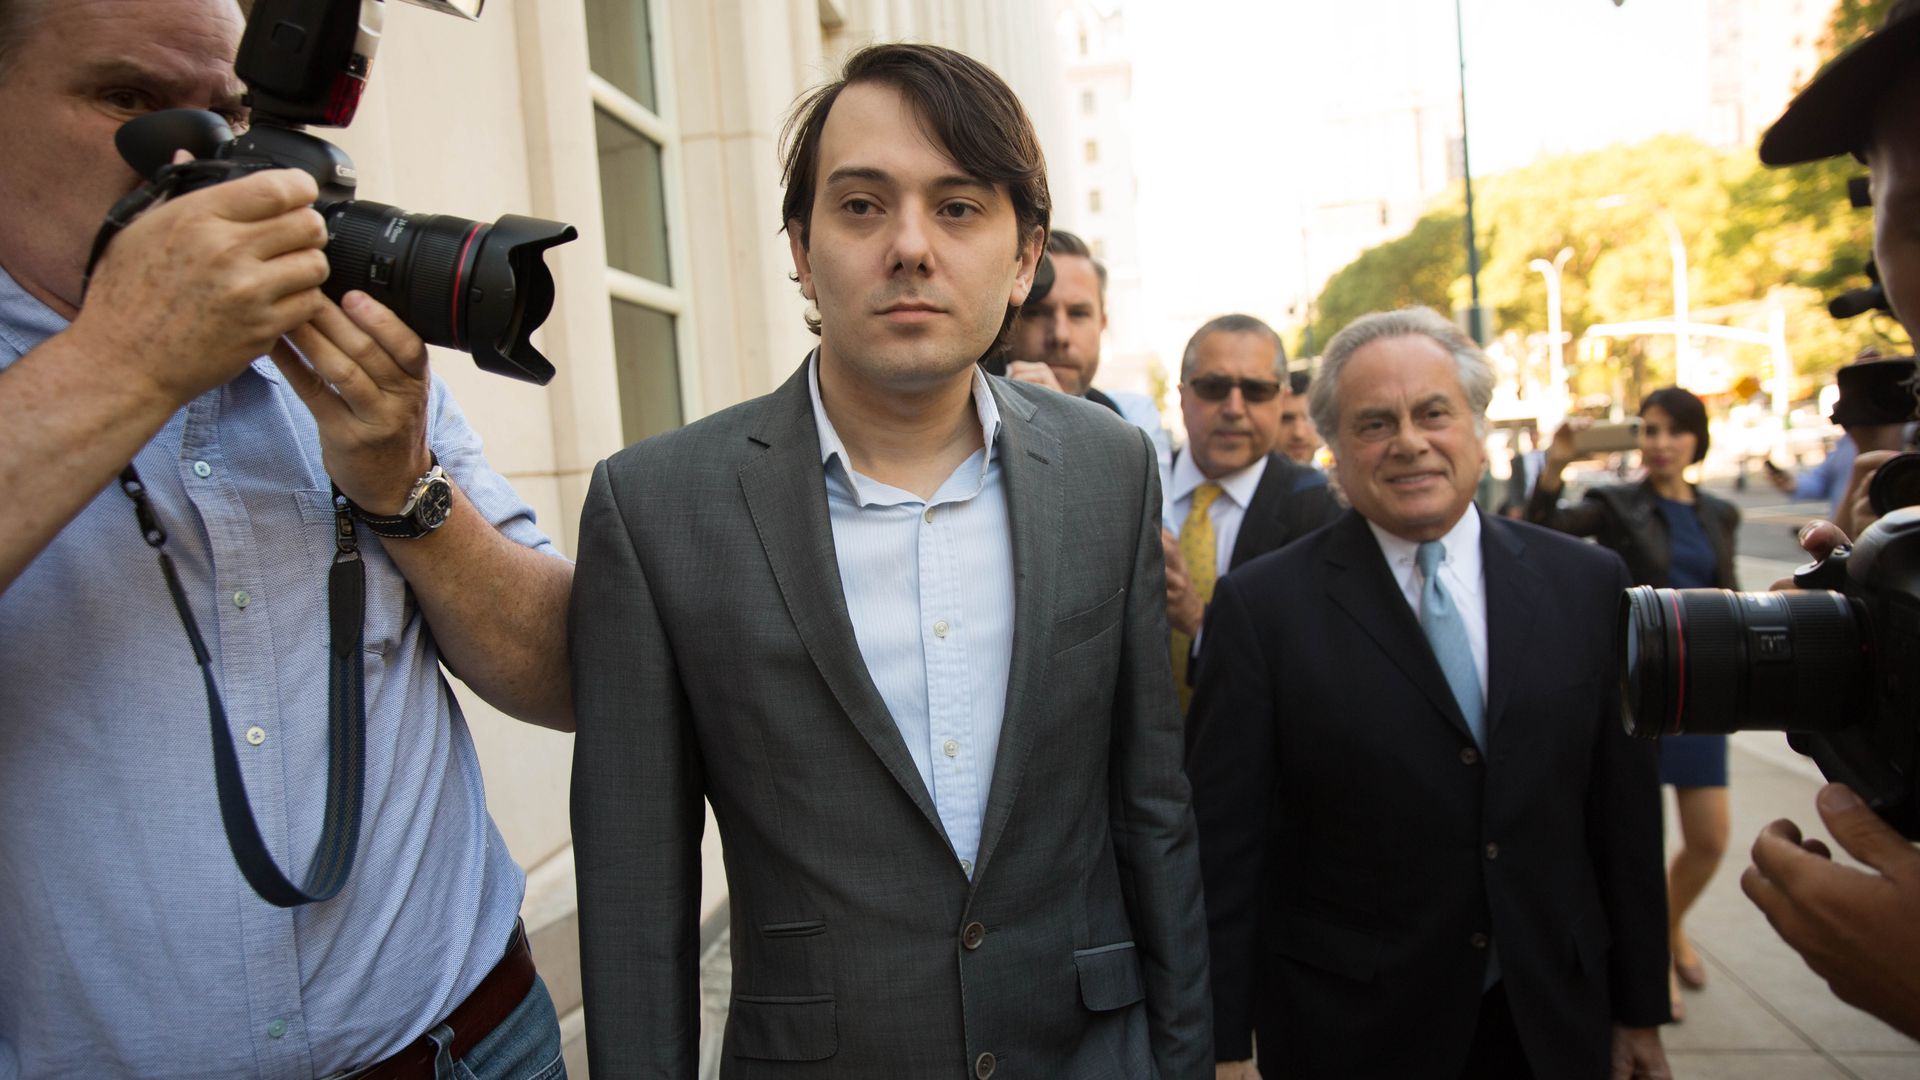 Ex-pharmaceutical executive Martin Shkreli arrives at the U.S. District Court for the Eastern District of New York